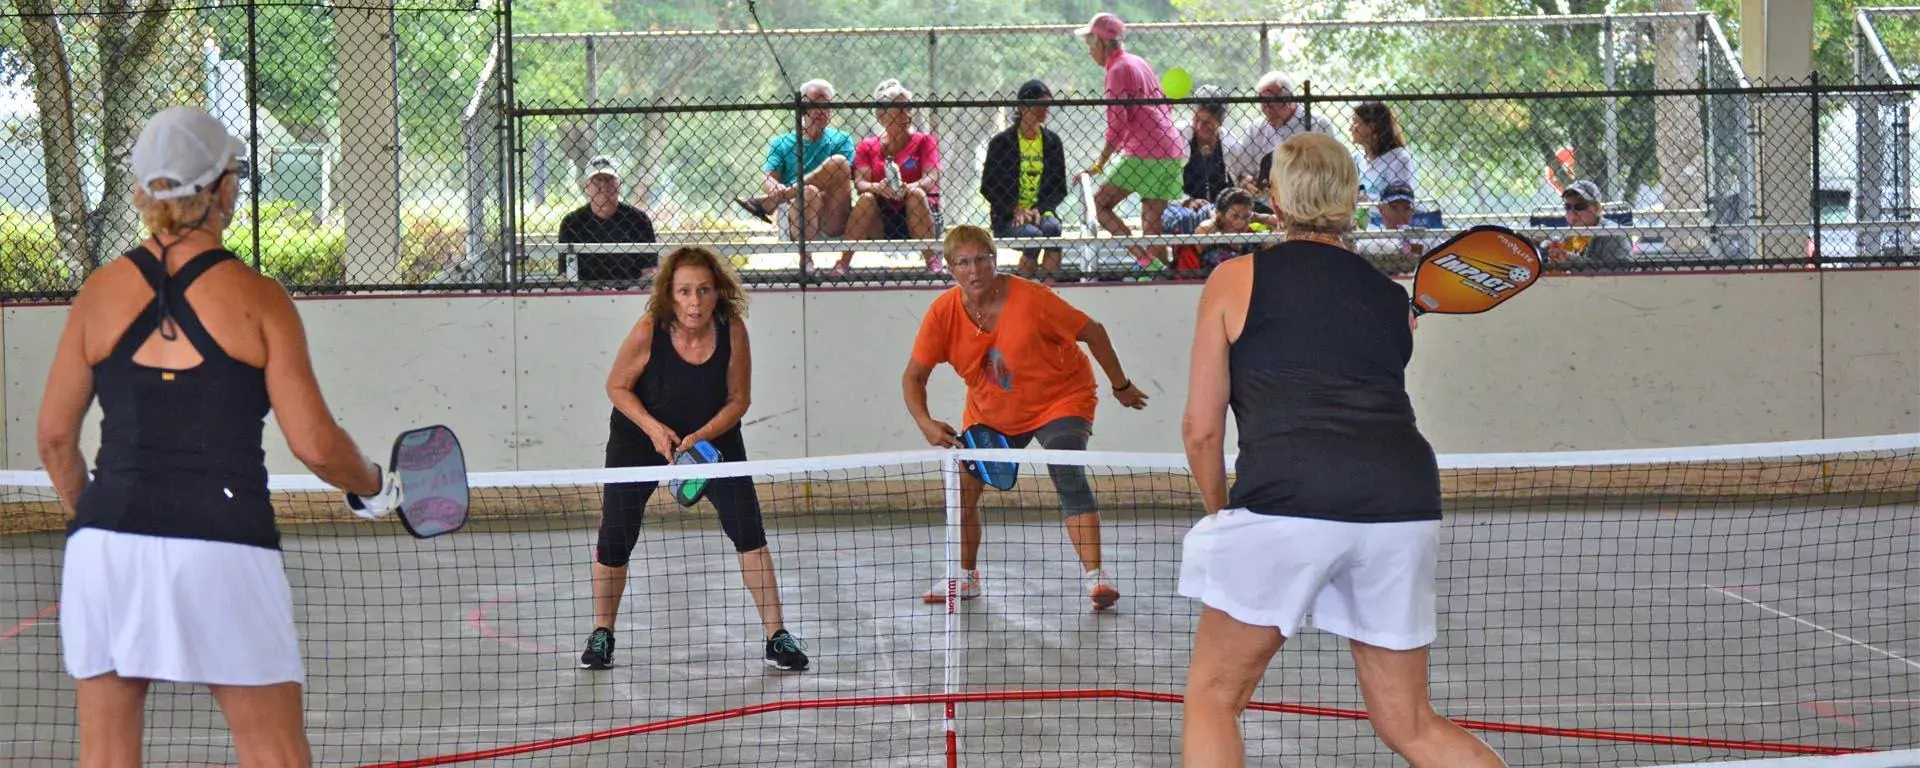 Pickleball game with women